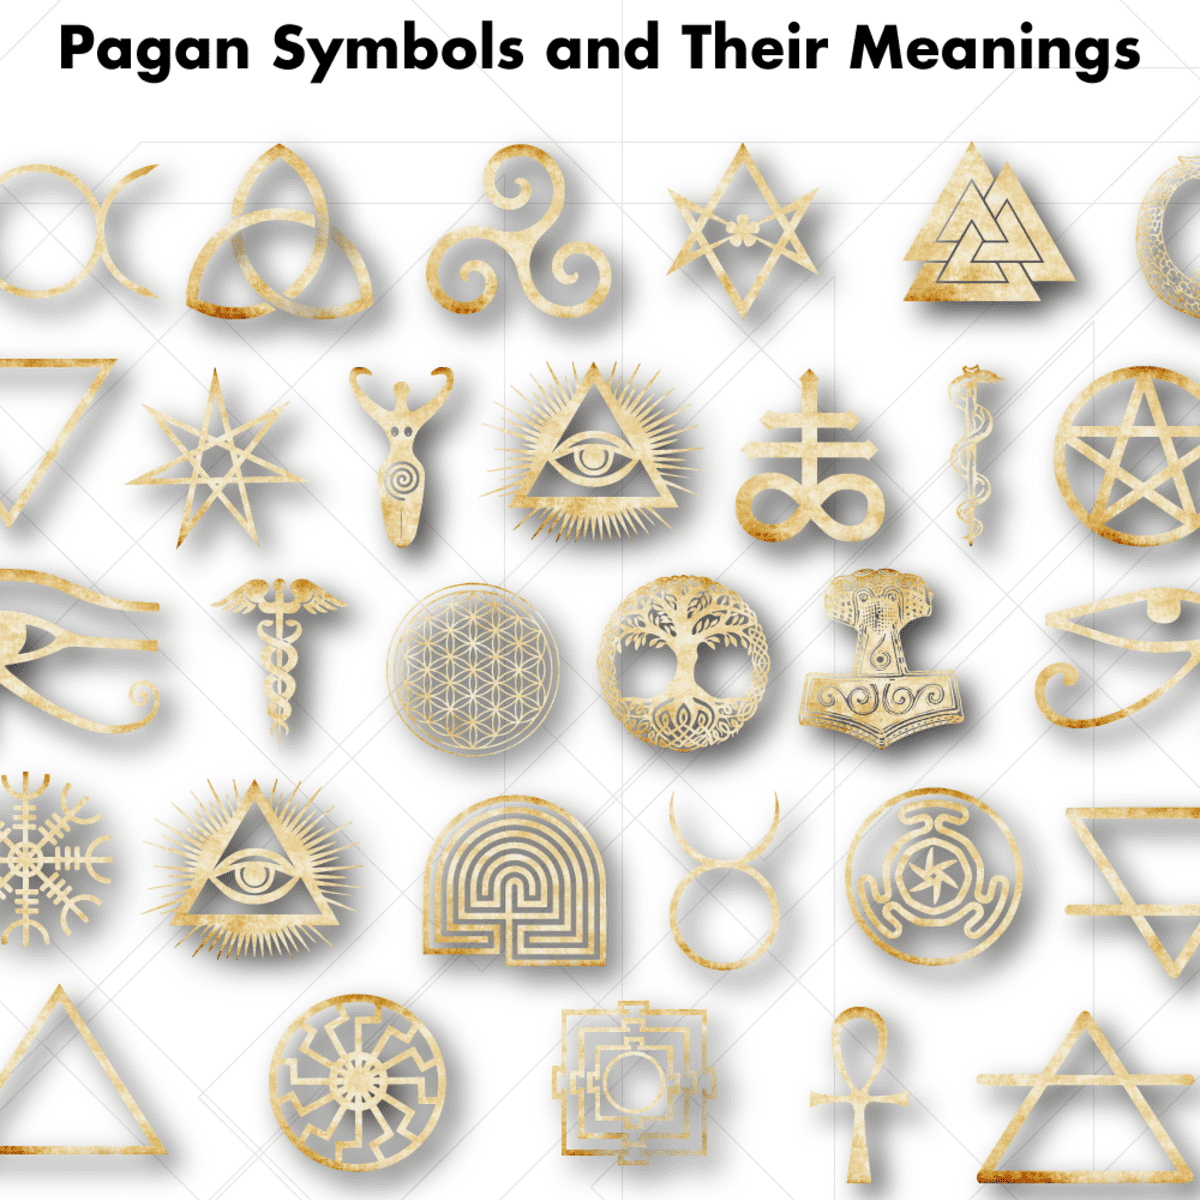 Pagan Symbols and Their Meanings - Exemplore